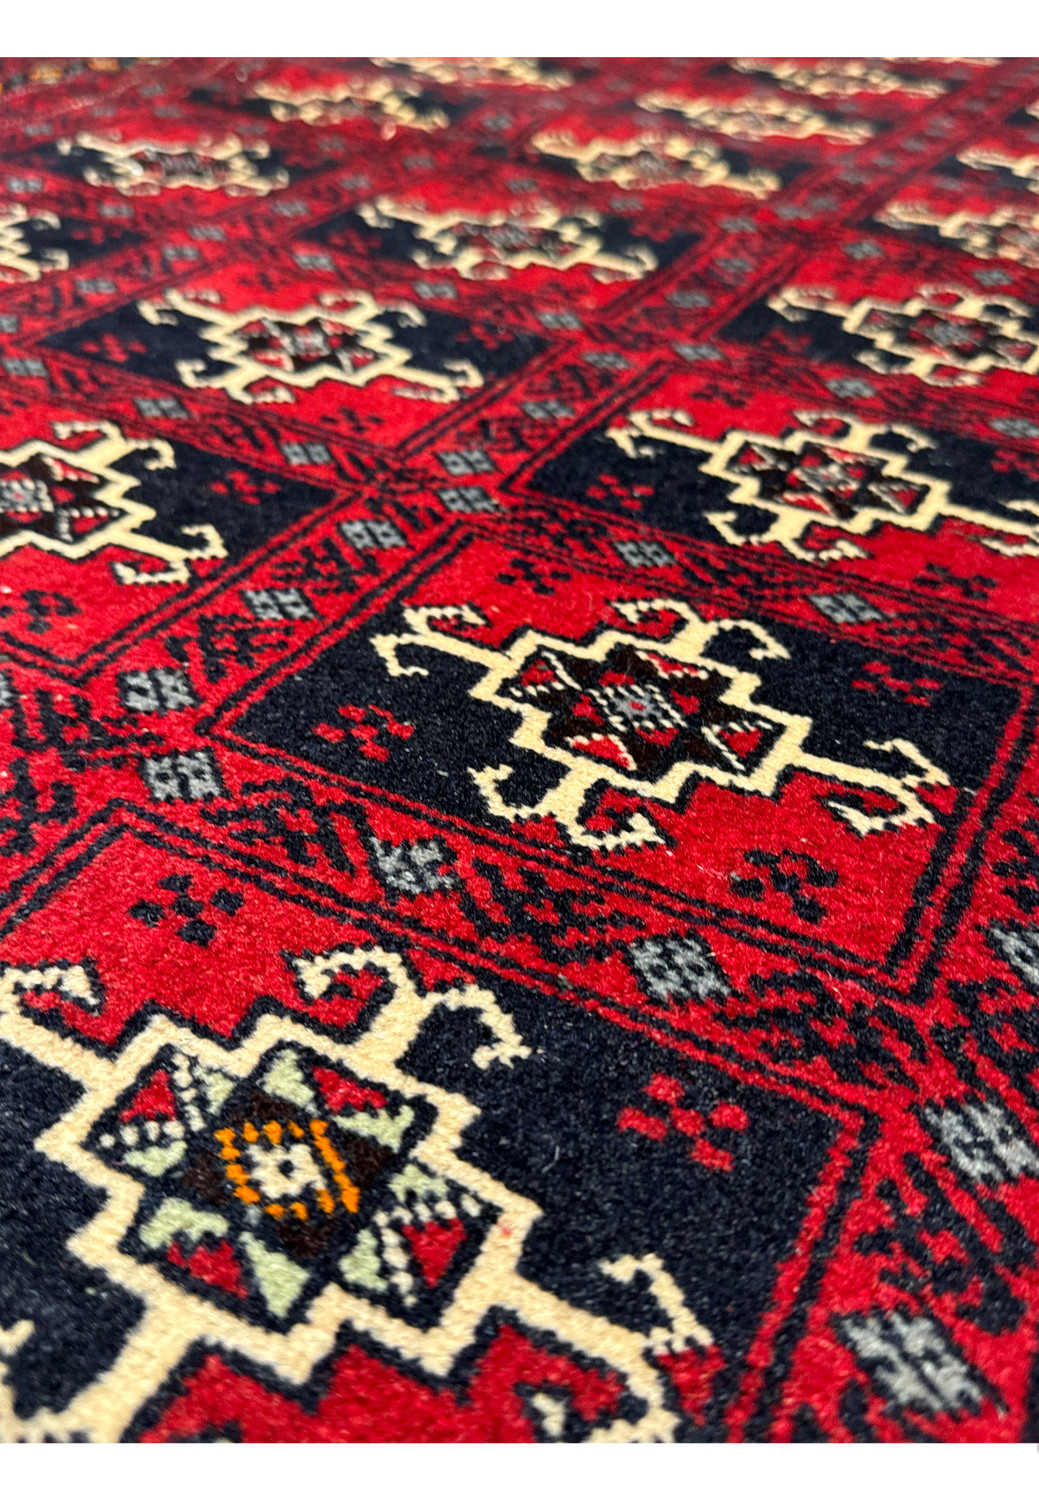 Close-up of the bottom section of the rug, showing the detailed border patterns and the fringed edge.